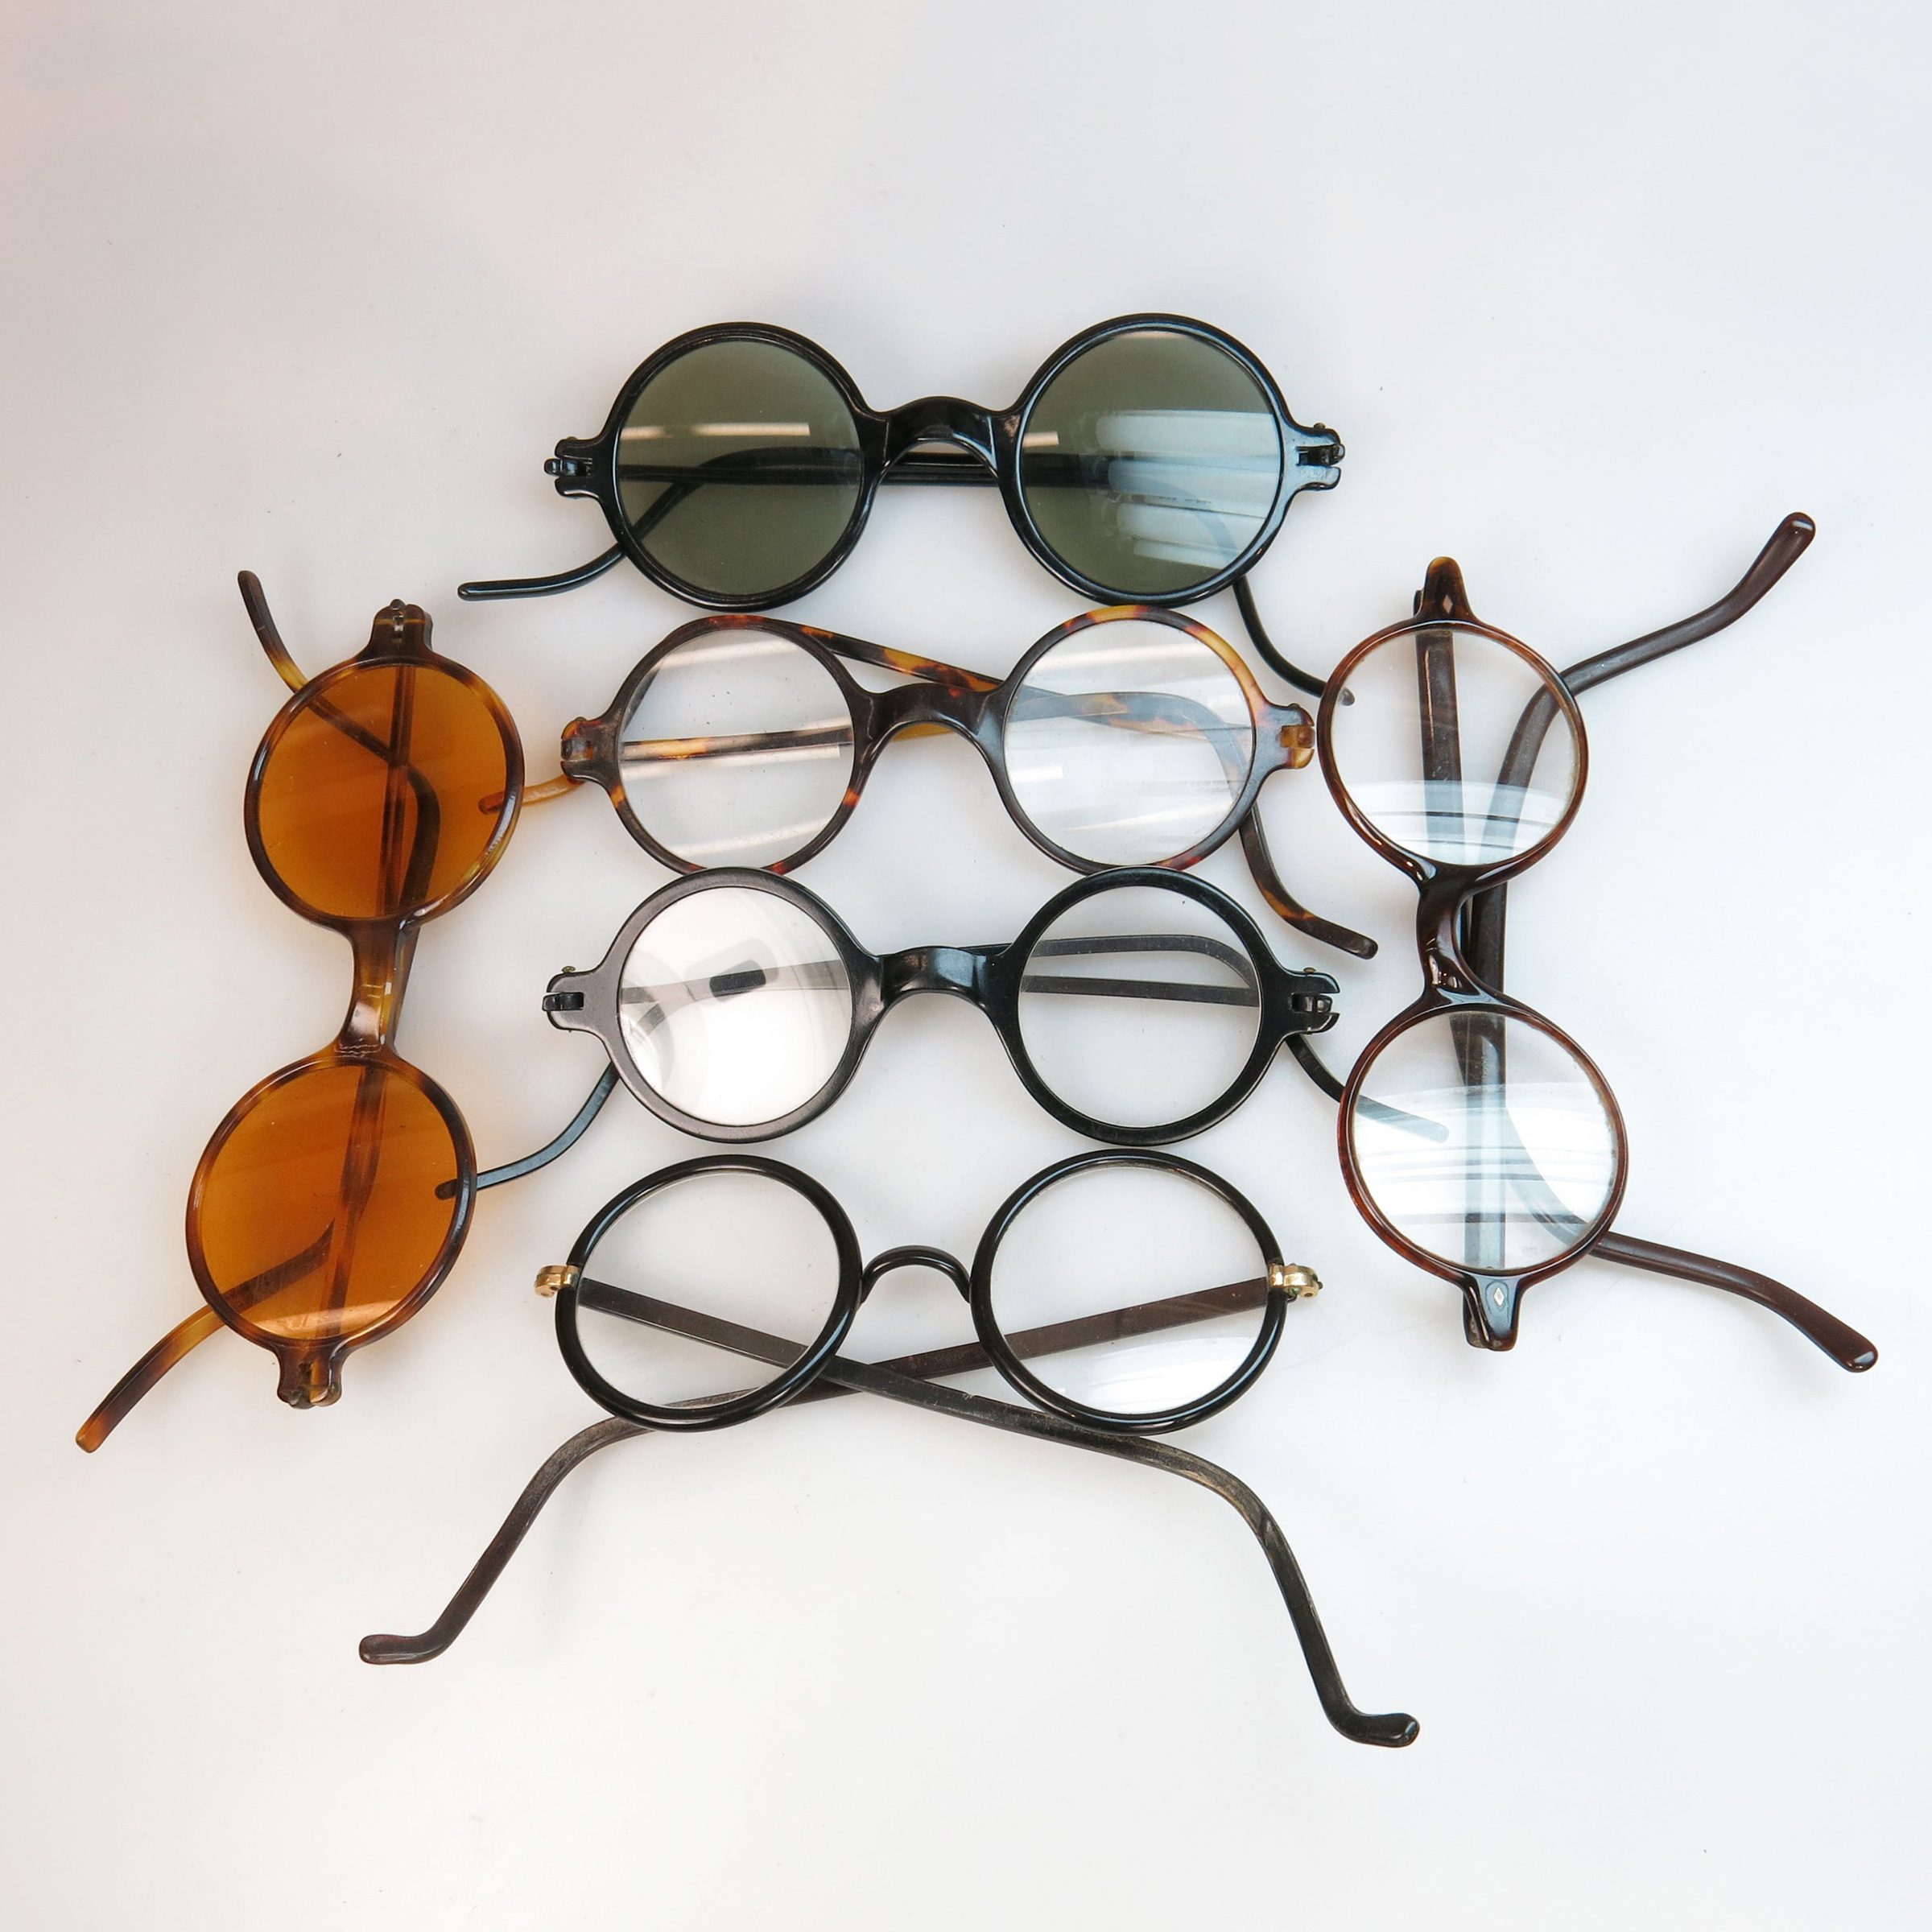 6 Pairs Of Early 20th Century Temple Spectacles